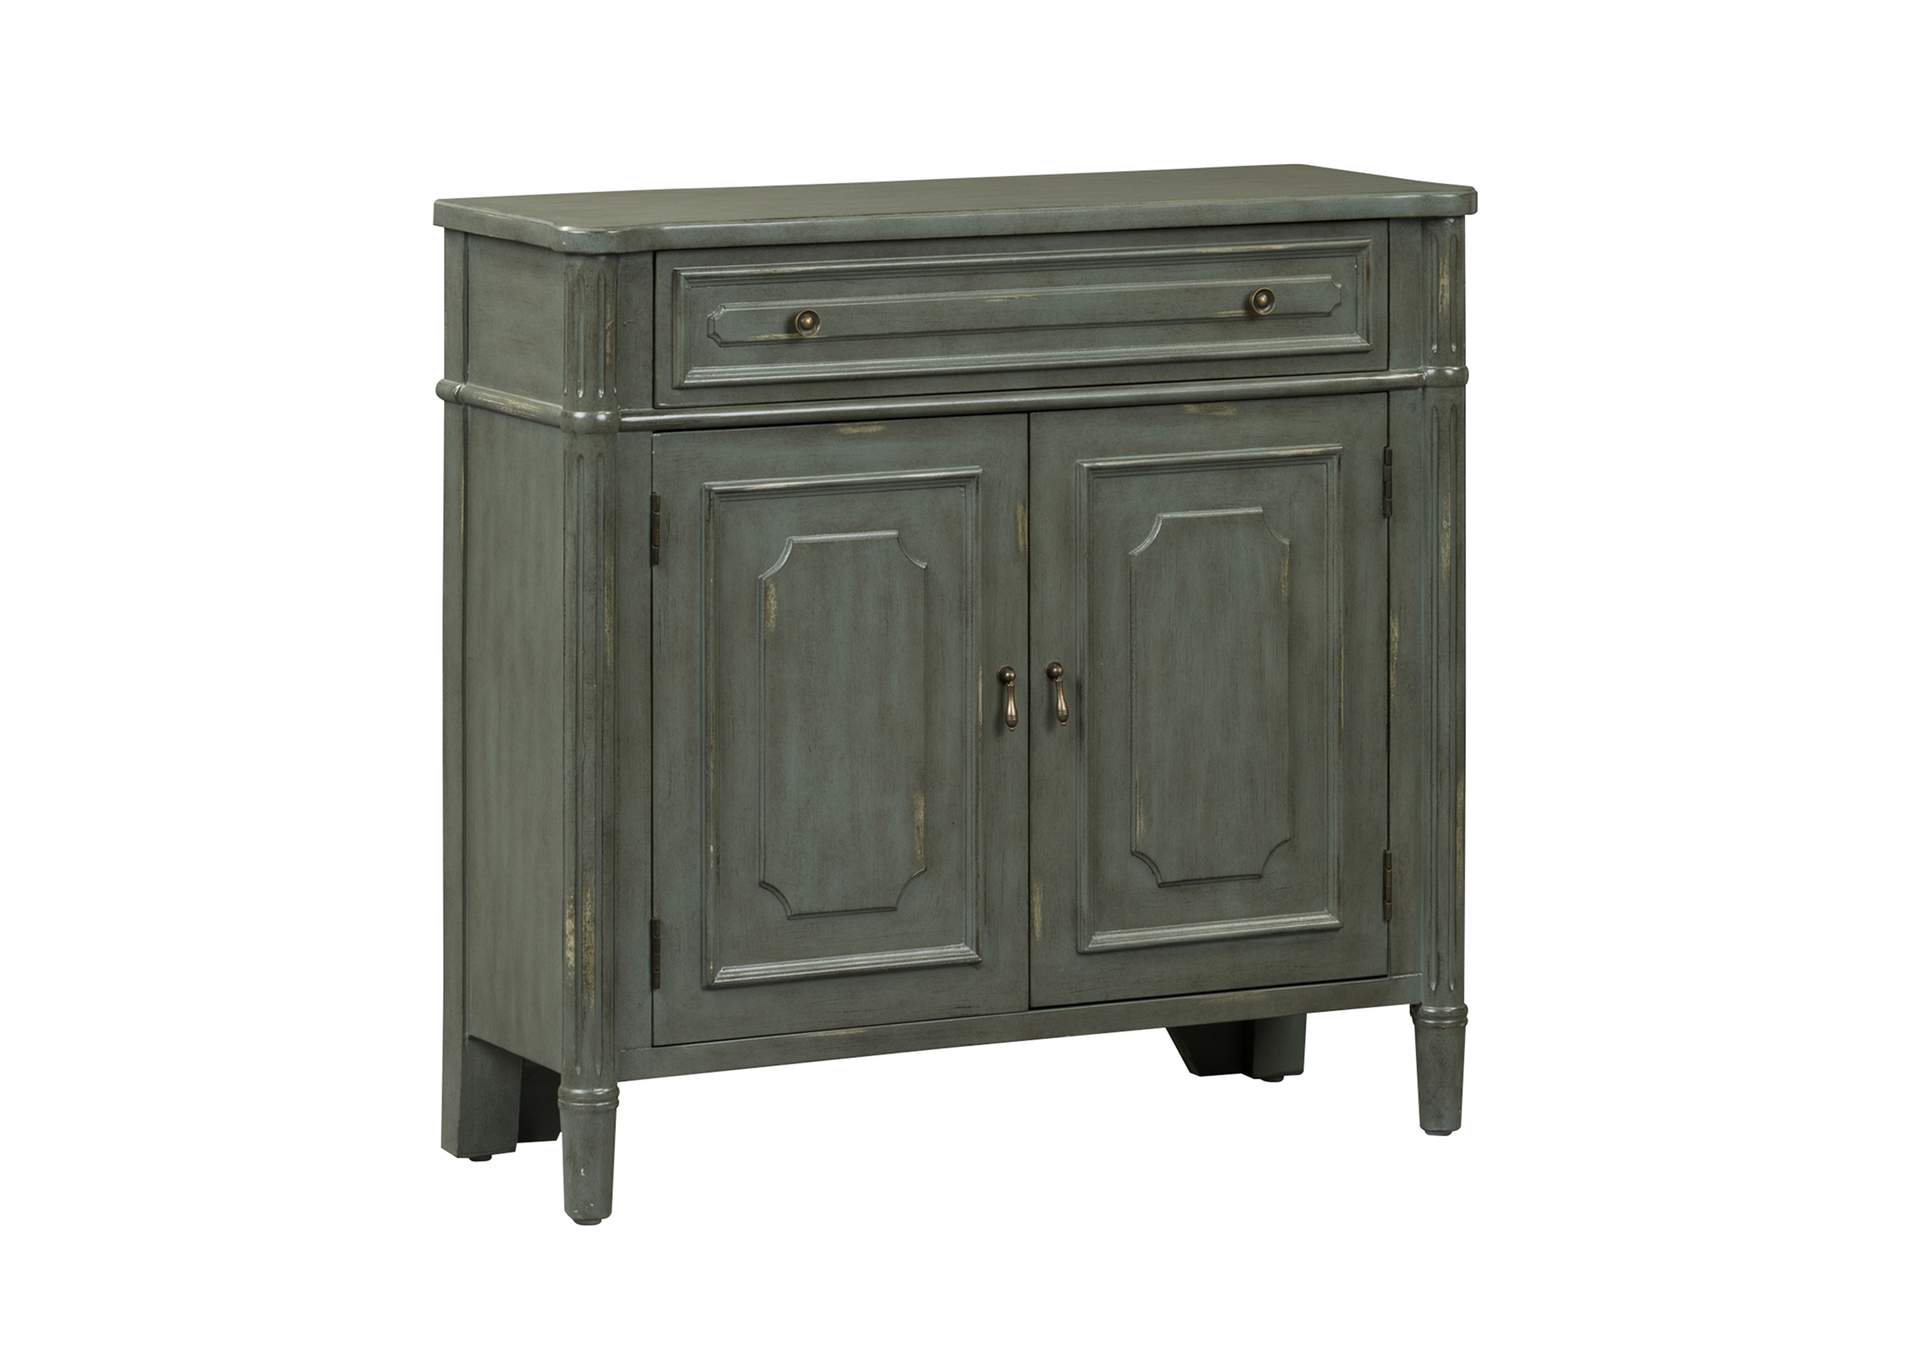 Jesup Furniture Outlet Madison Park Gray 1 Drawer 2 Door Accent